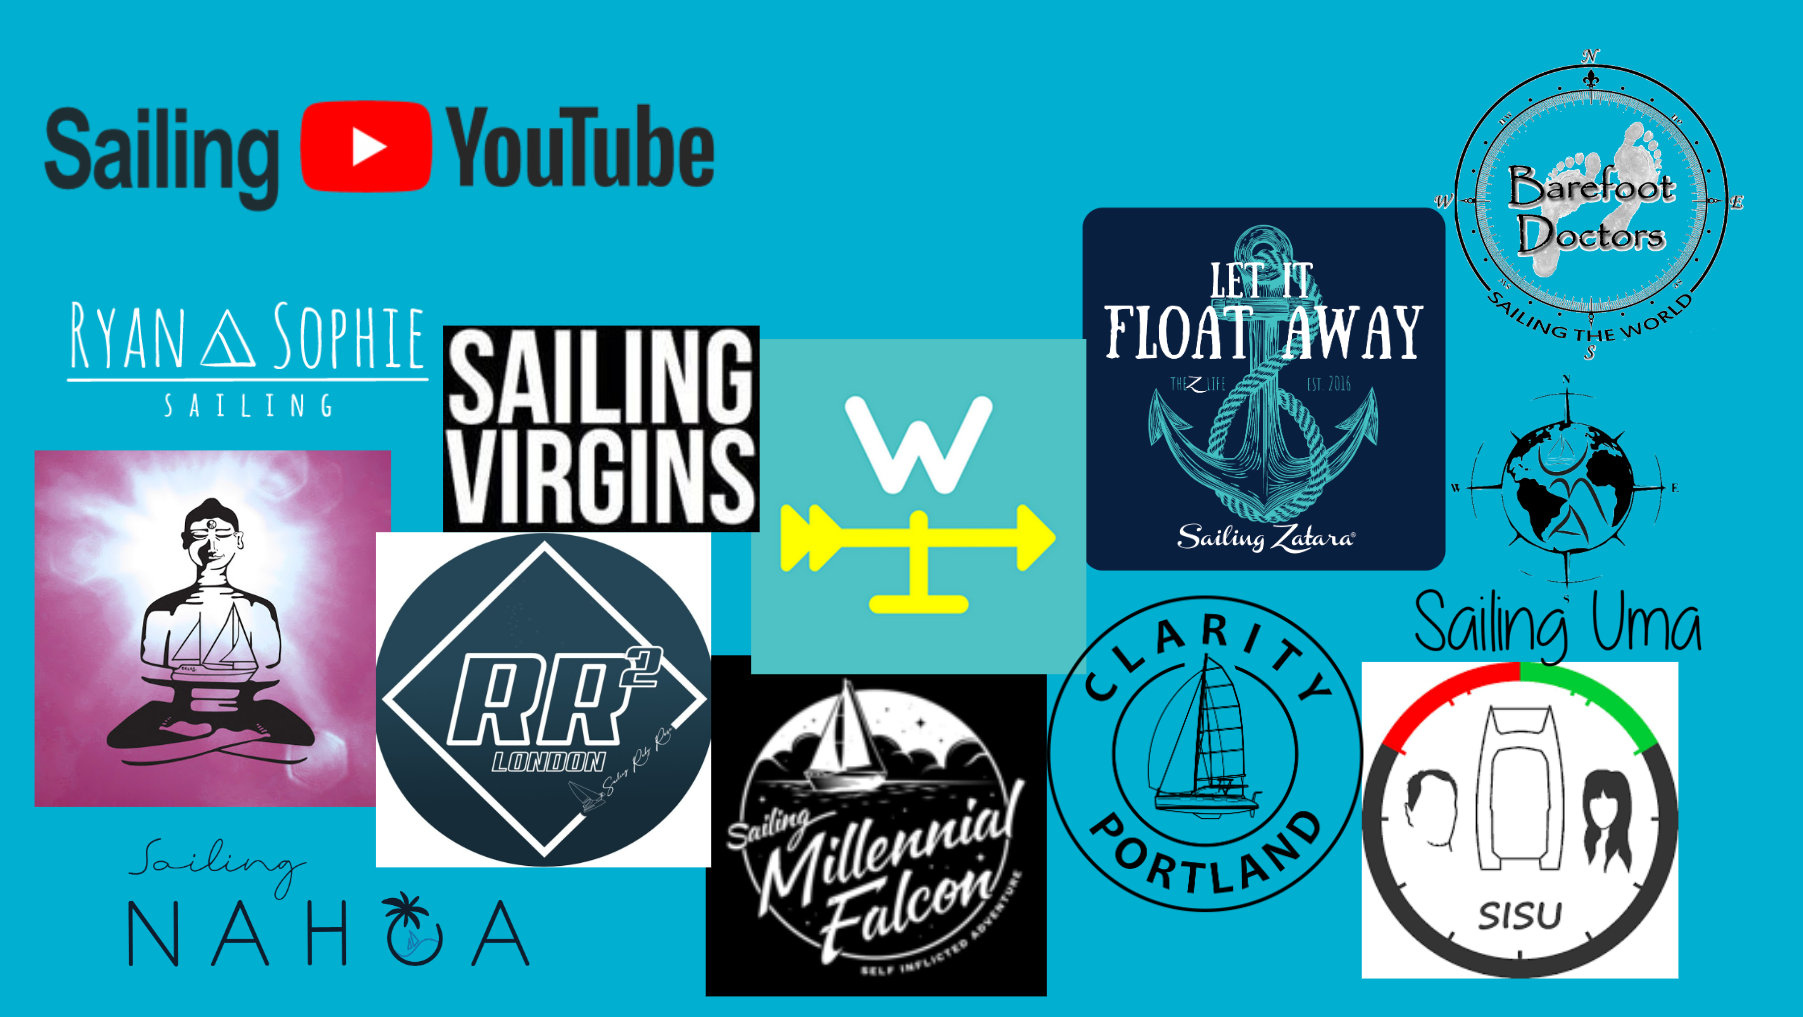 Logos of YouTube channel about liveaboard sailboats videos